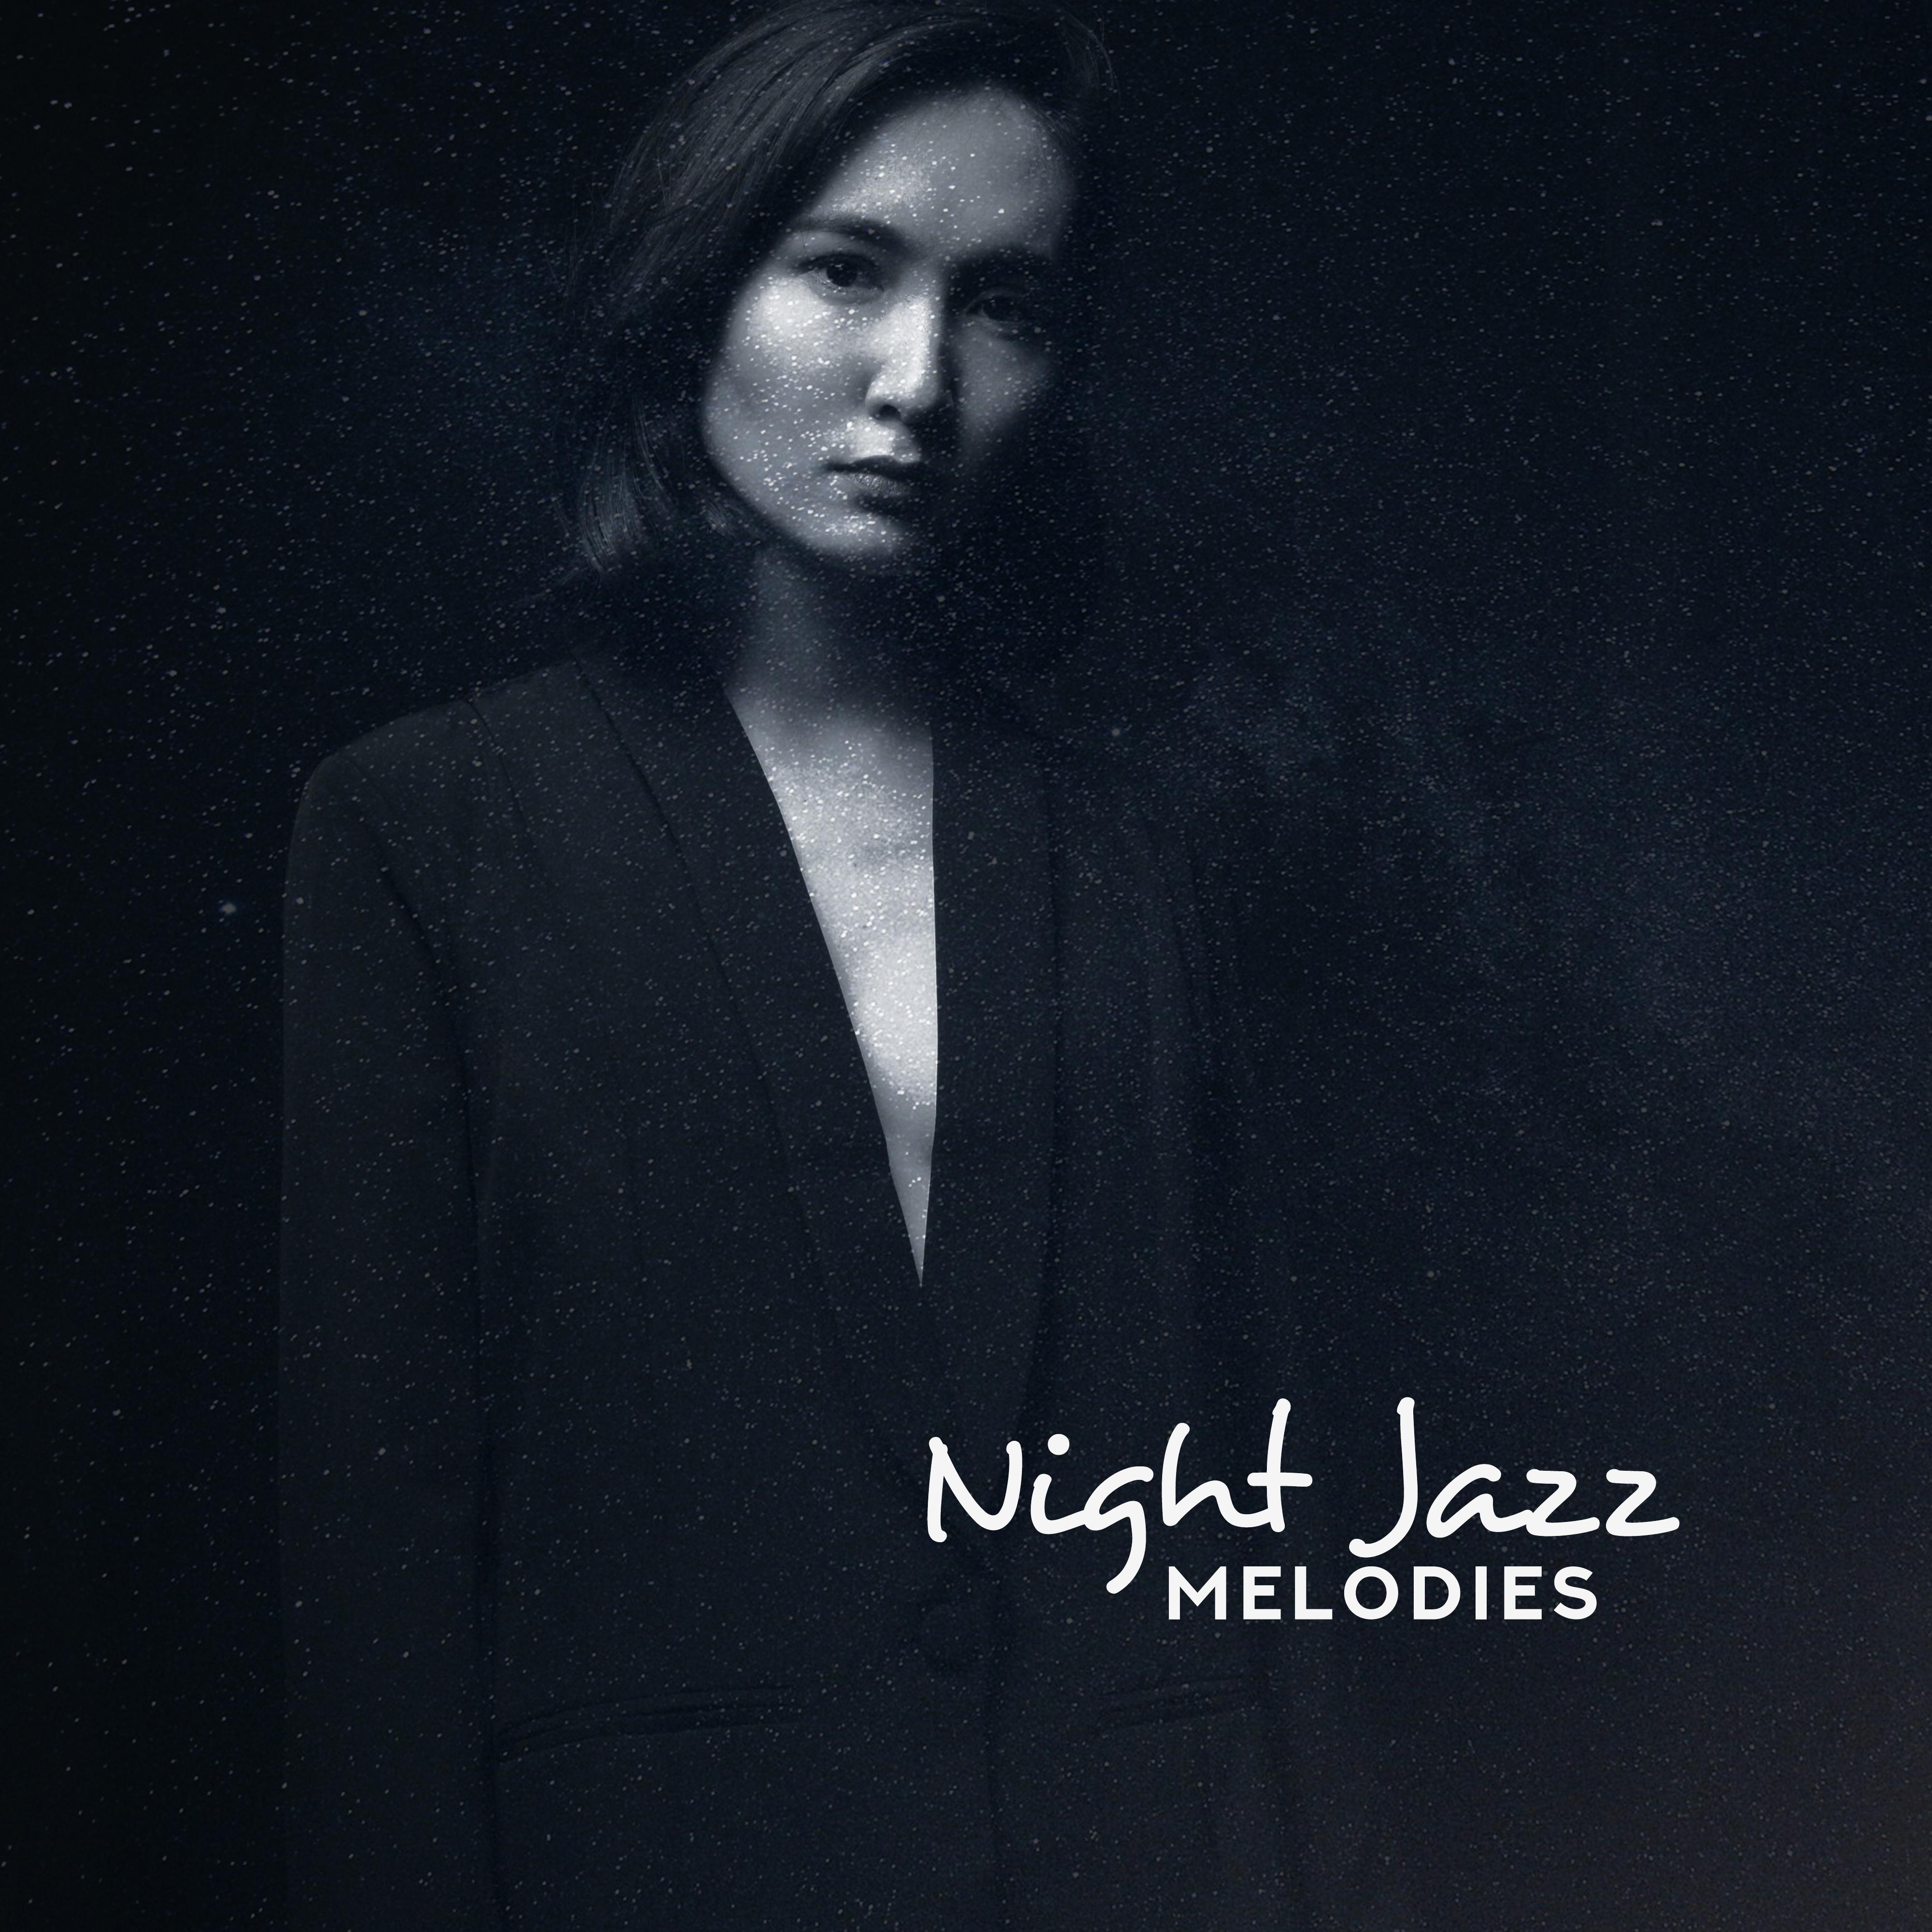 Night Jazz Melodies – Smooth Music for Relaxation, Calming Vibes, Soft Lullabies, Classical Jazz 2019